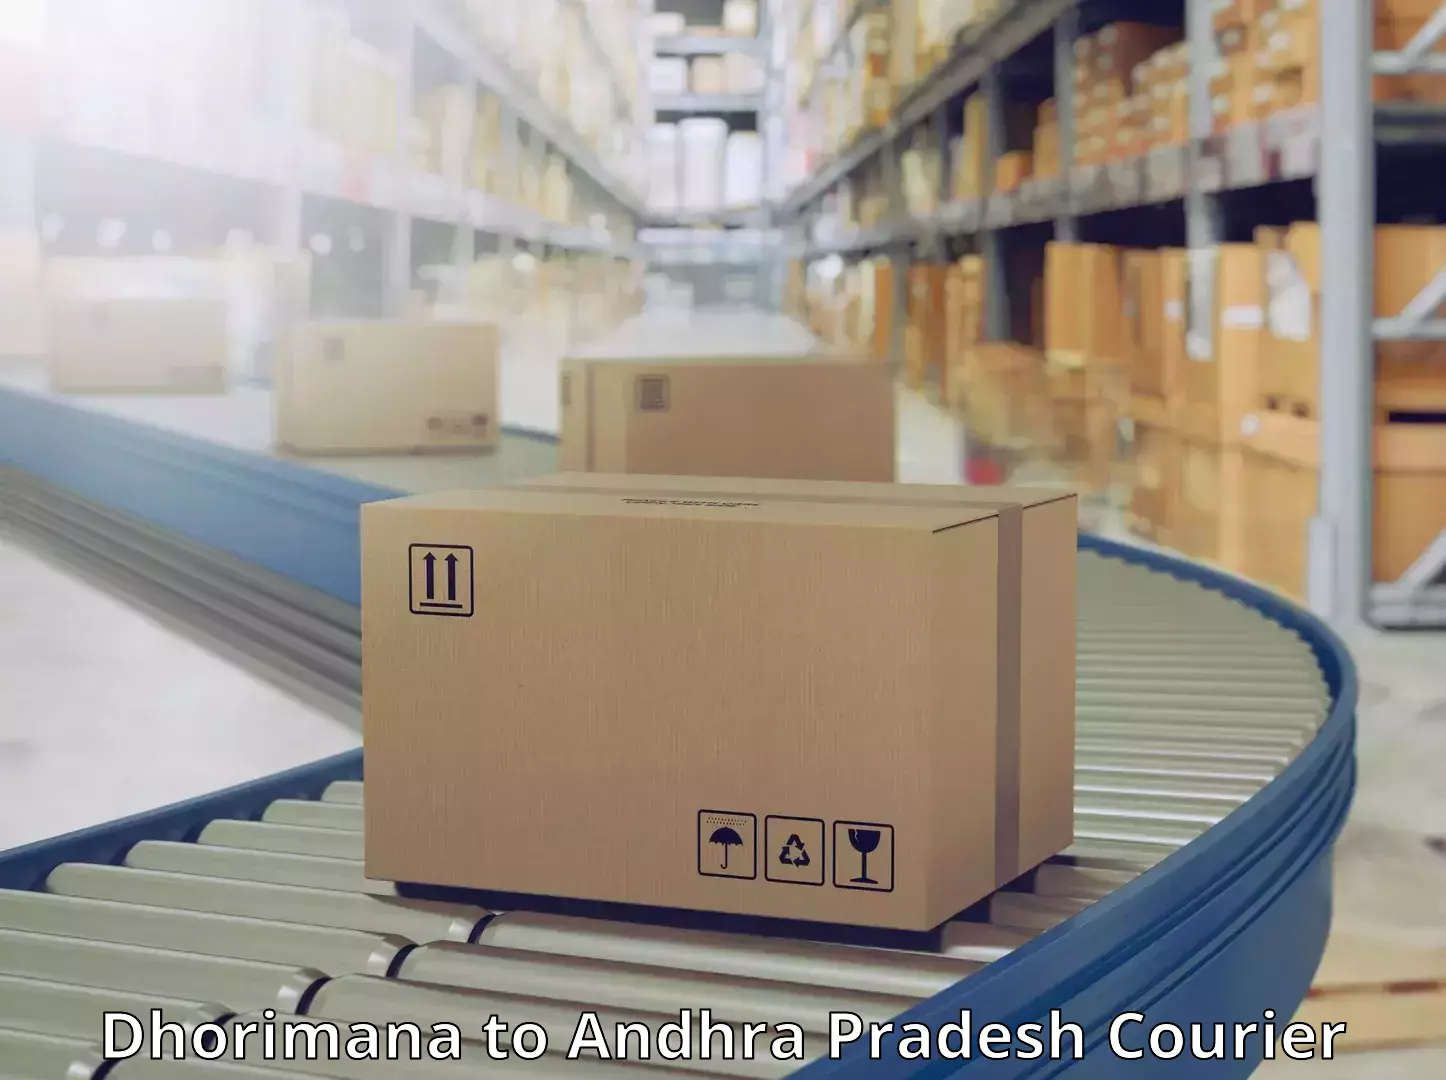 State-of-the-art courier technology Dhorimana to Anakapalli